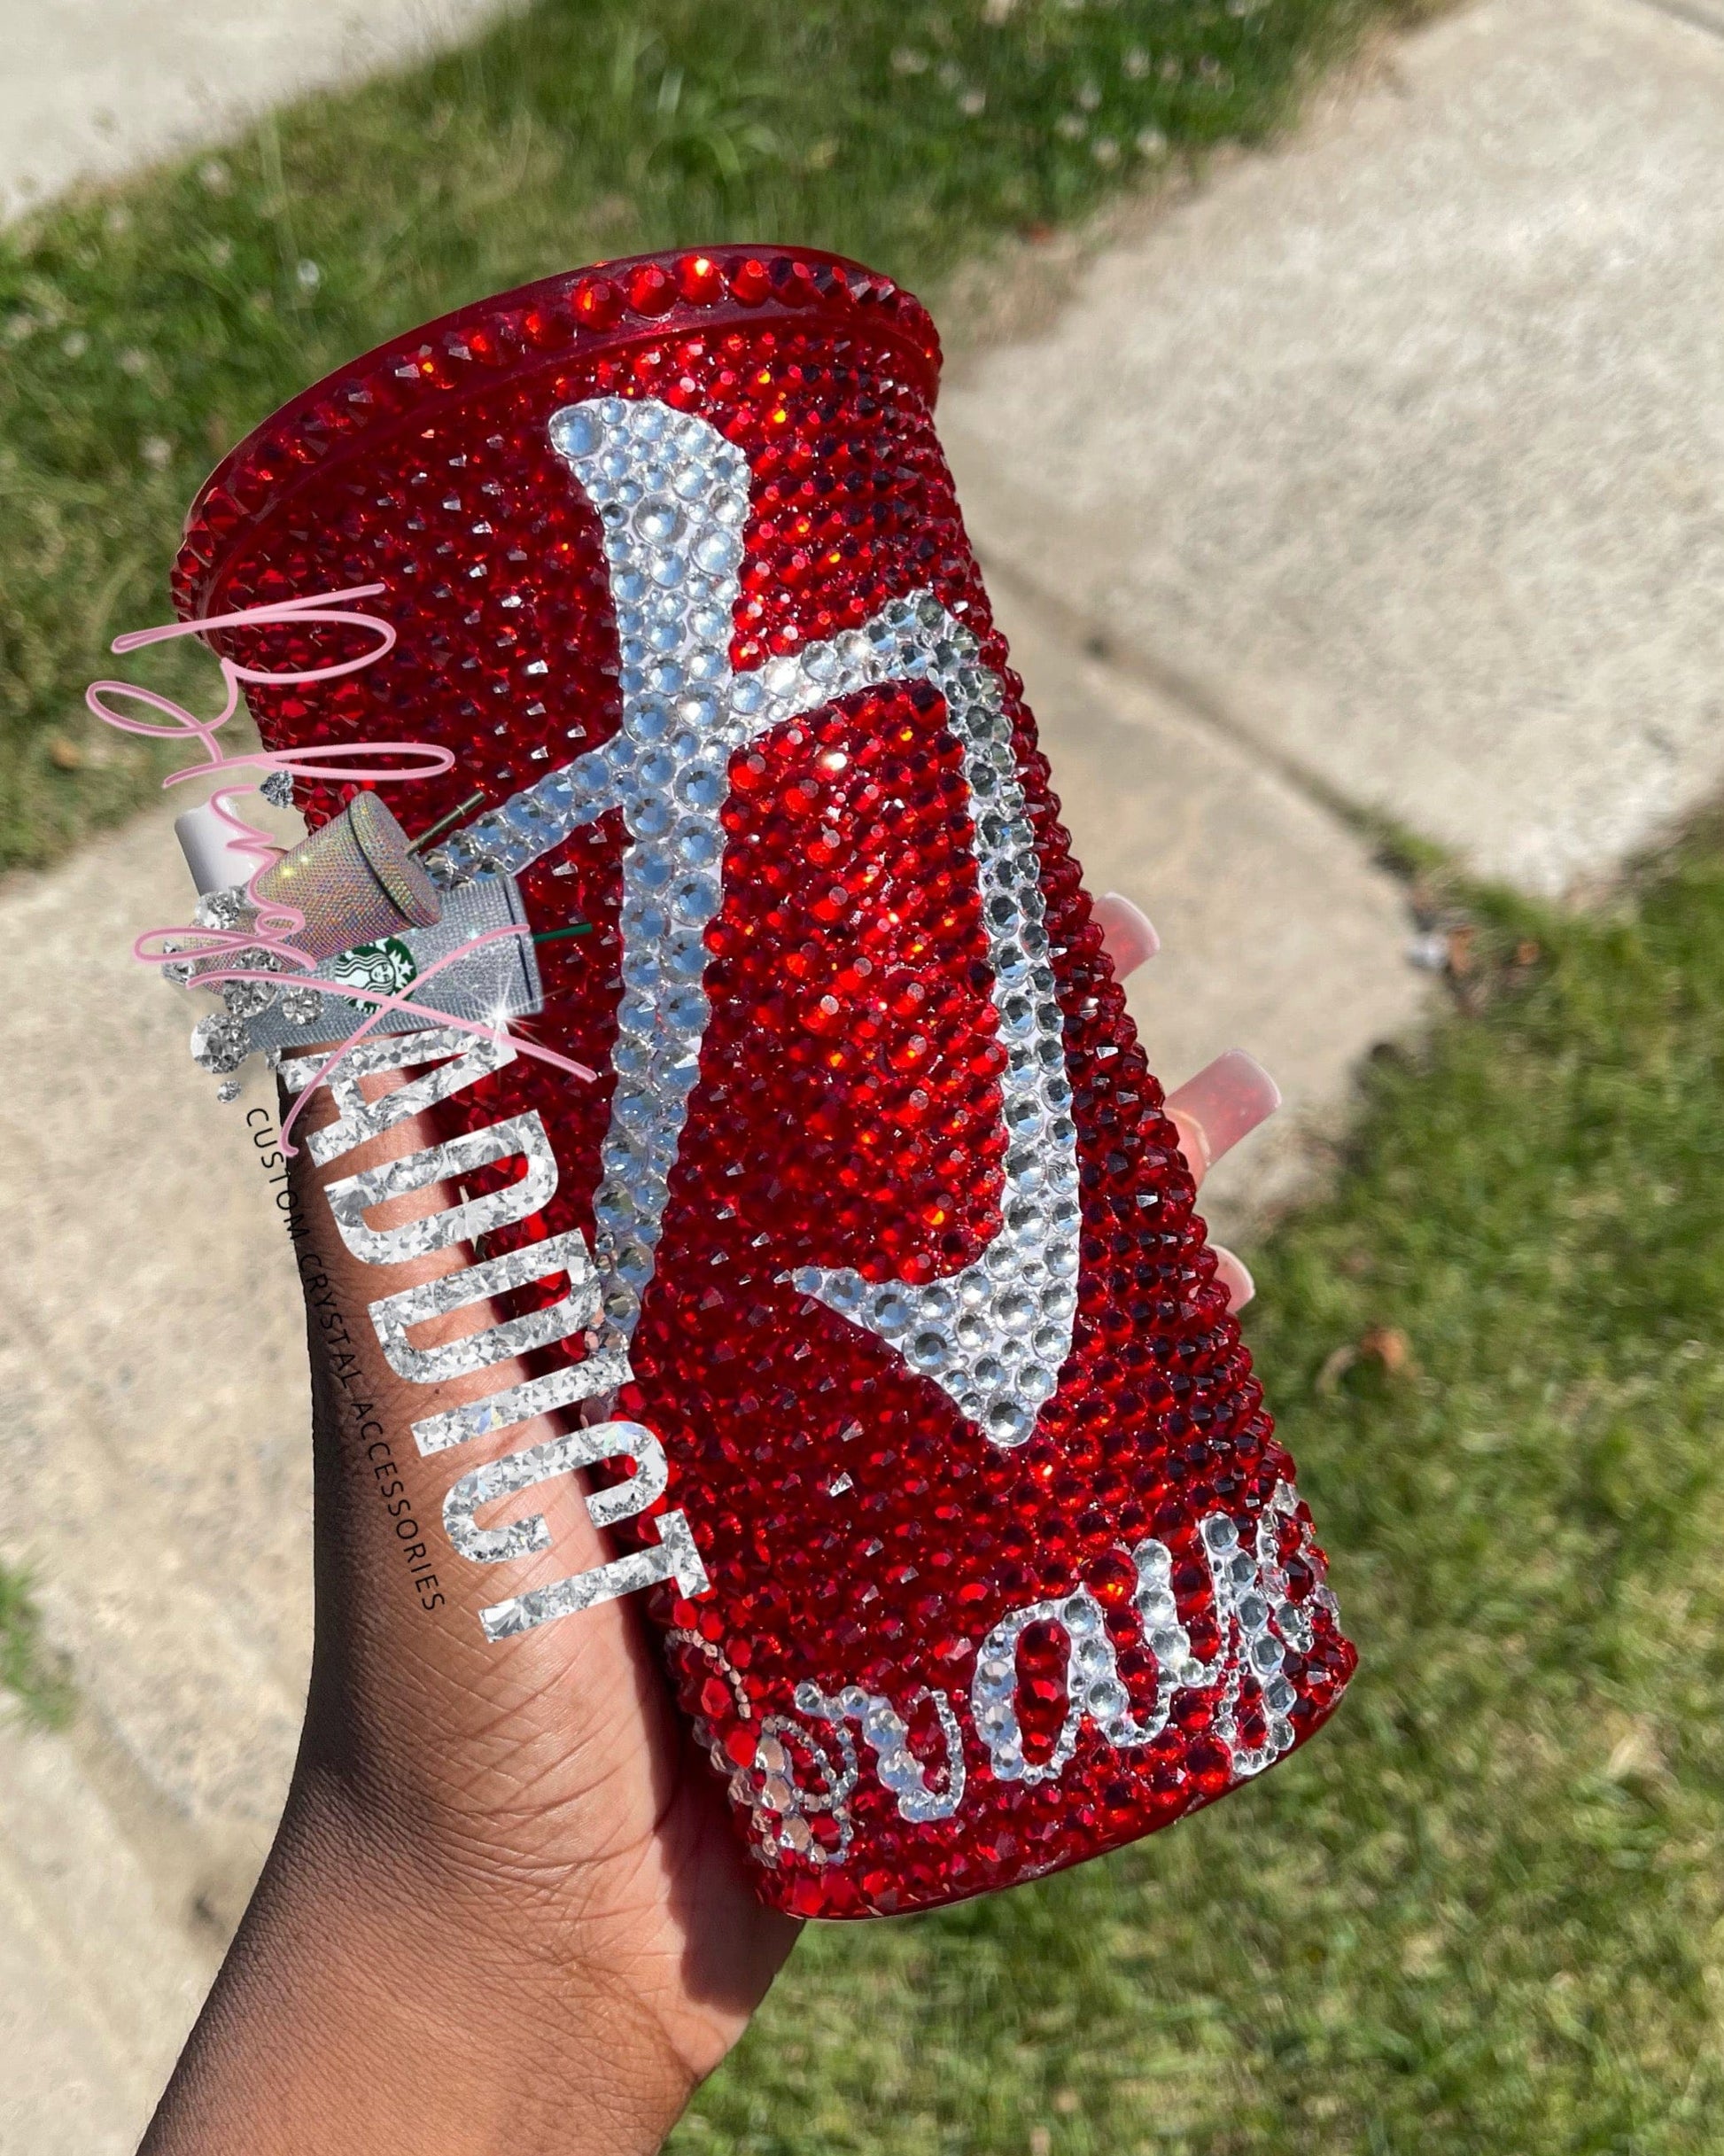 Fa Mulan Strength or Courage Crystal Bling Tumbler Cup Tumblers by Bling Addict | BlingxAddict